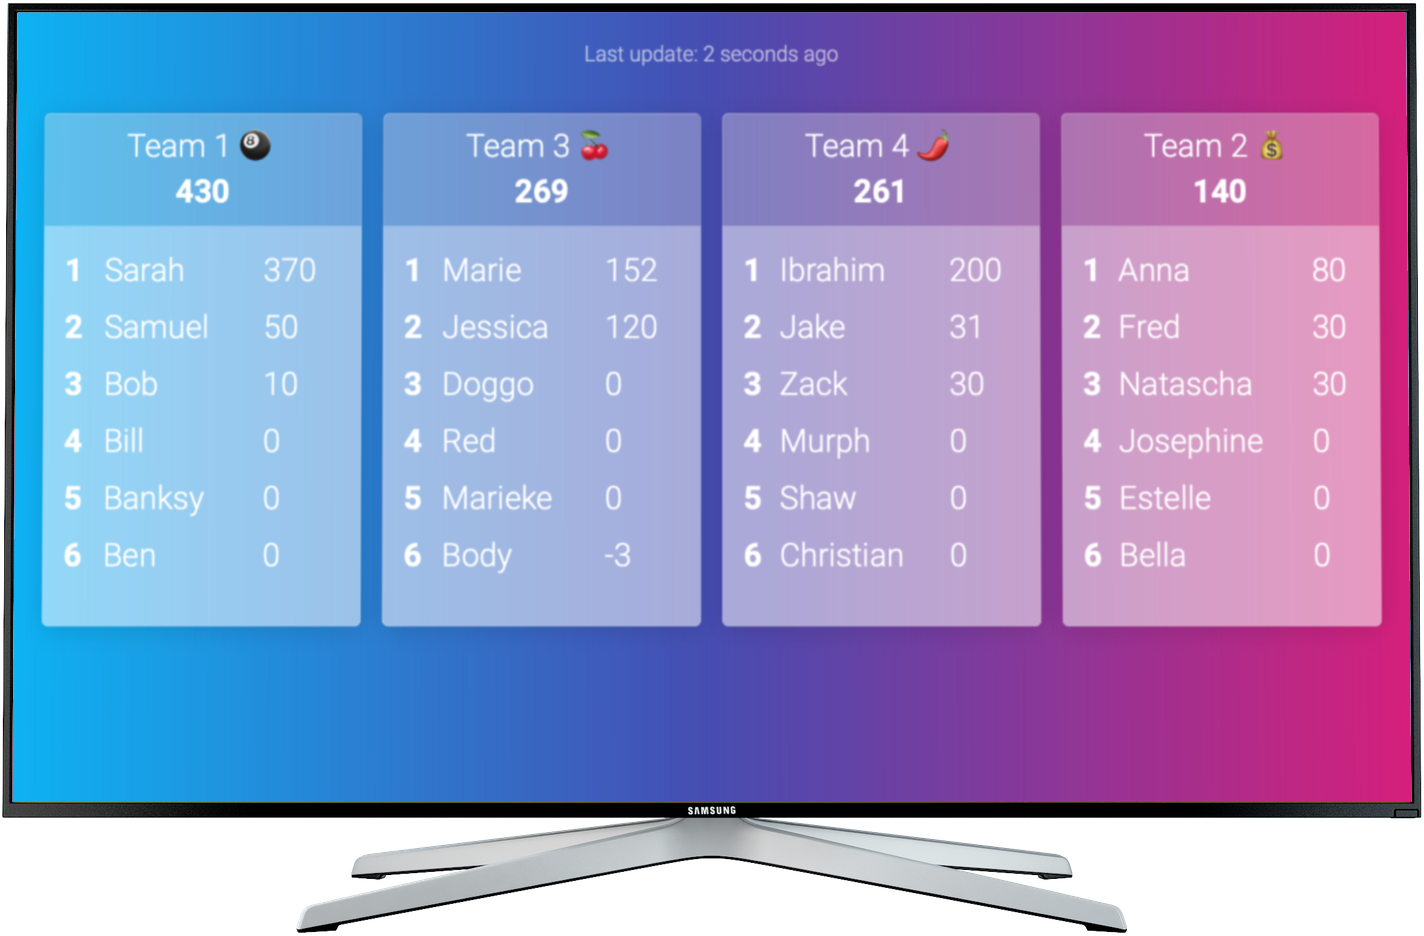 If you want to create a scoreboard or leaderboard for your classroom then look no further! Team leaderboards make it easy.